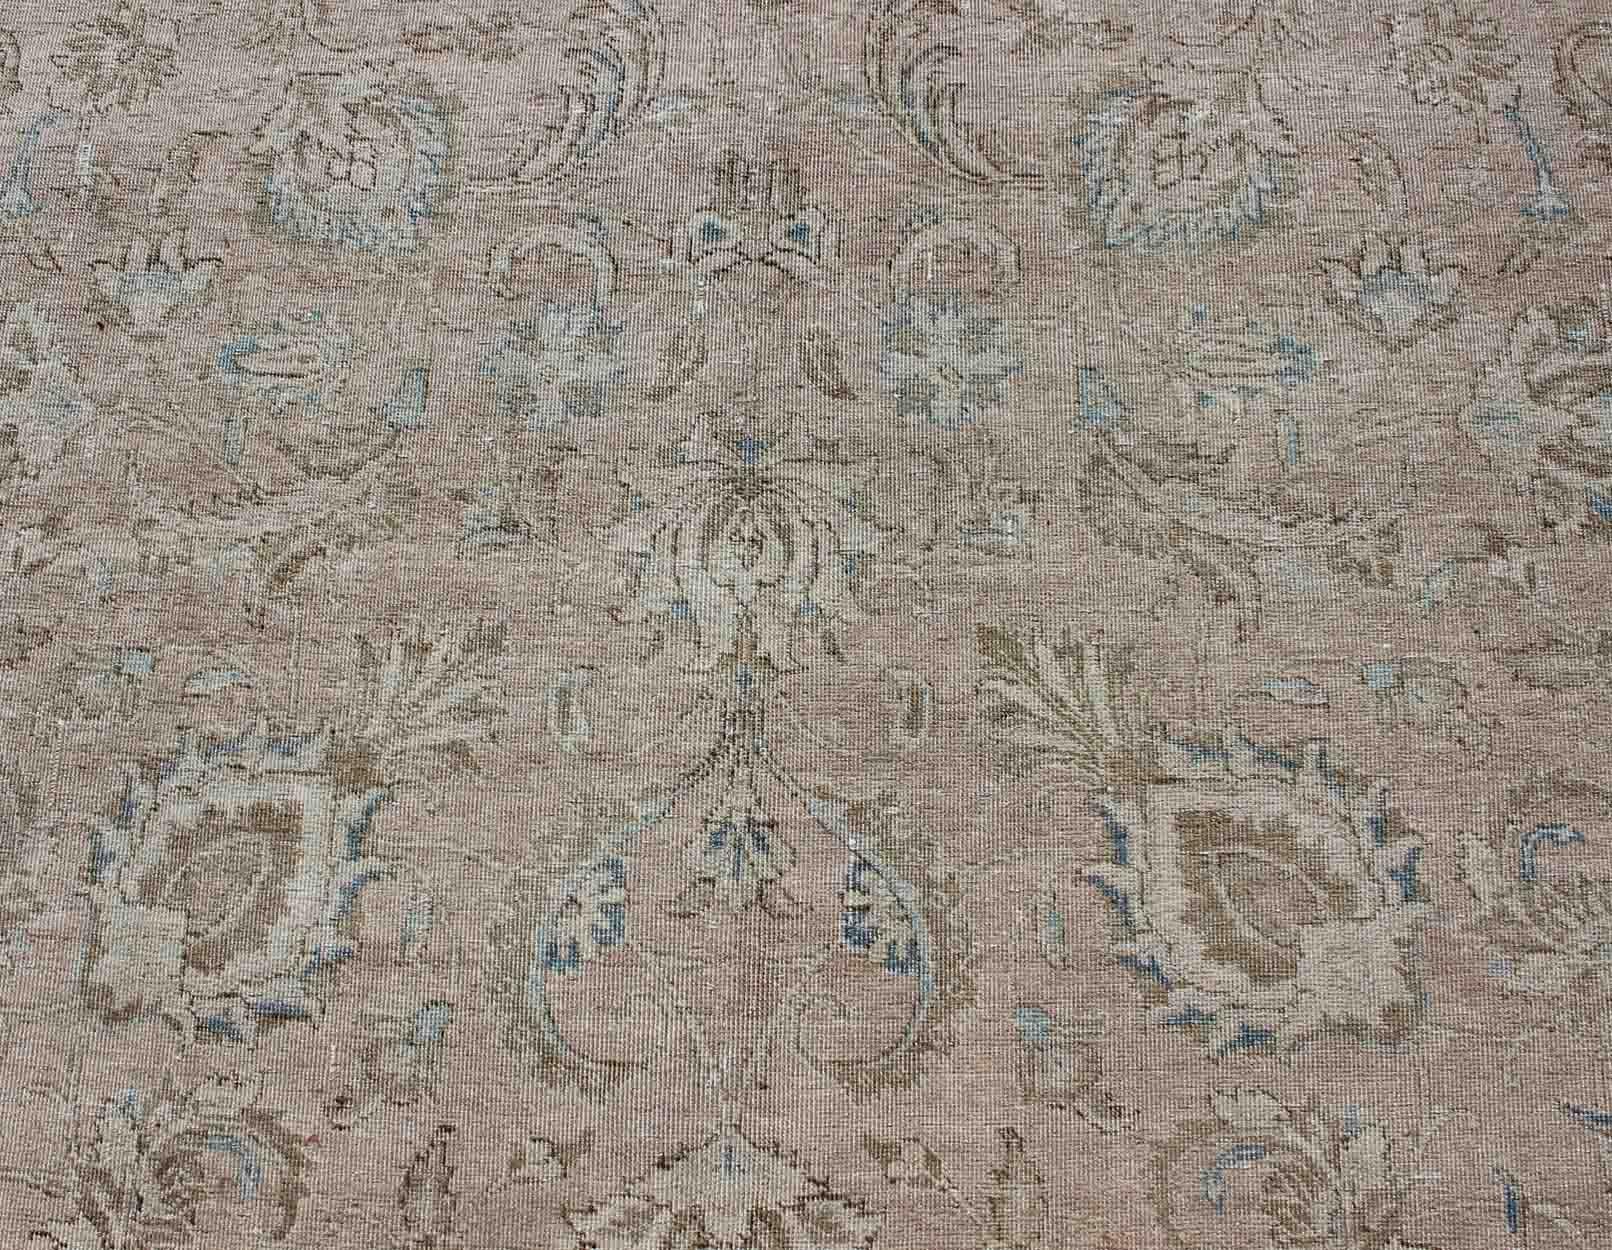 Persian Tabriz Long Rug with Floral Design in Ivory, Blue, Blush, Brown For Sale 1